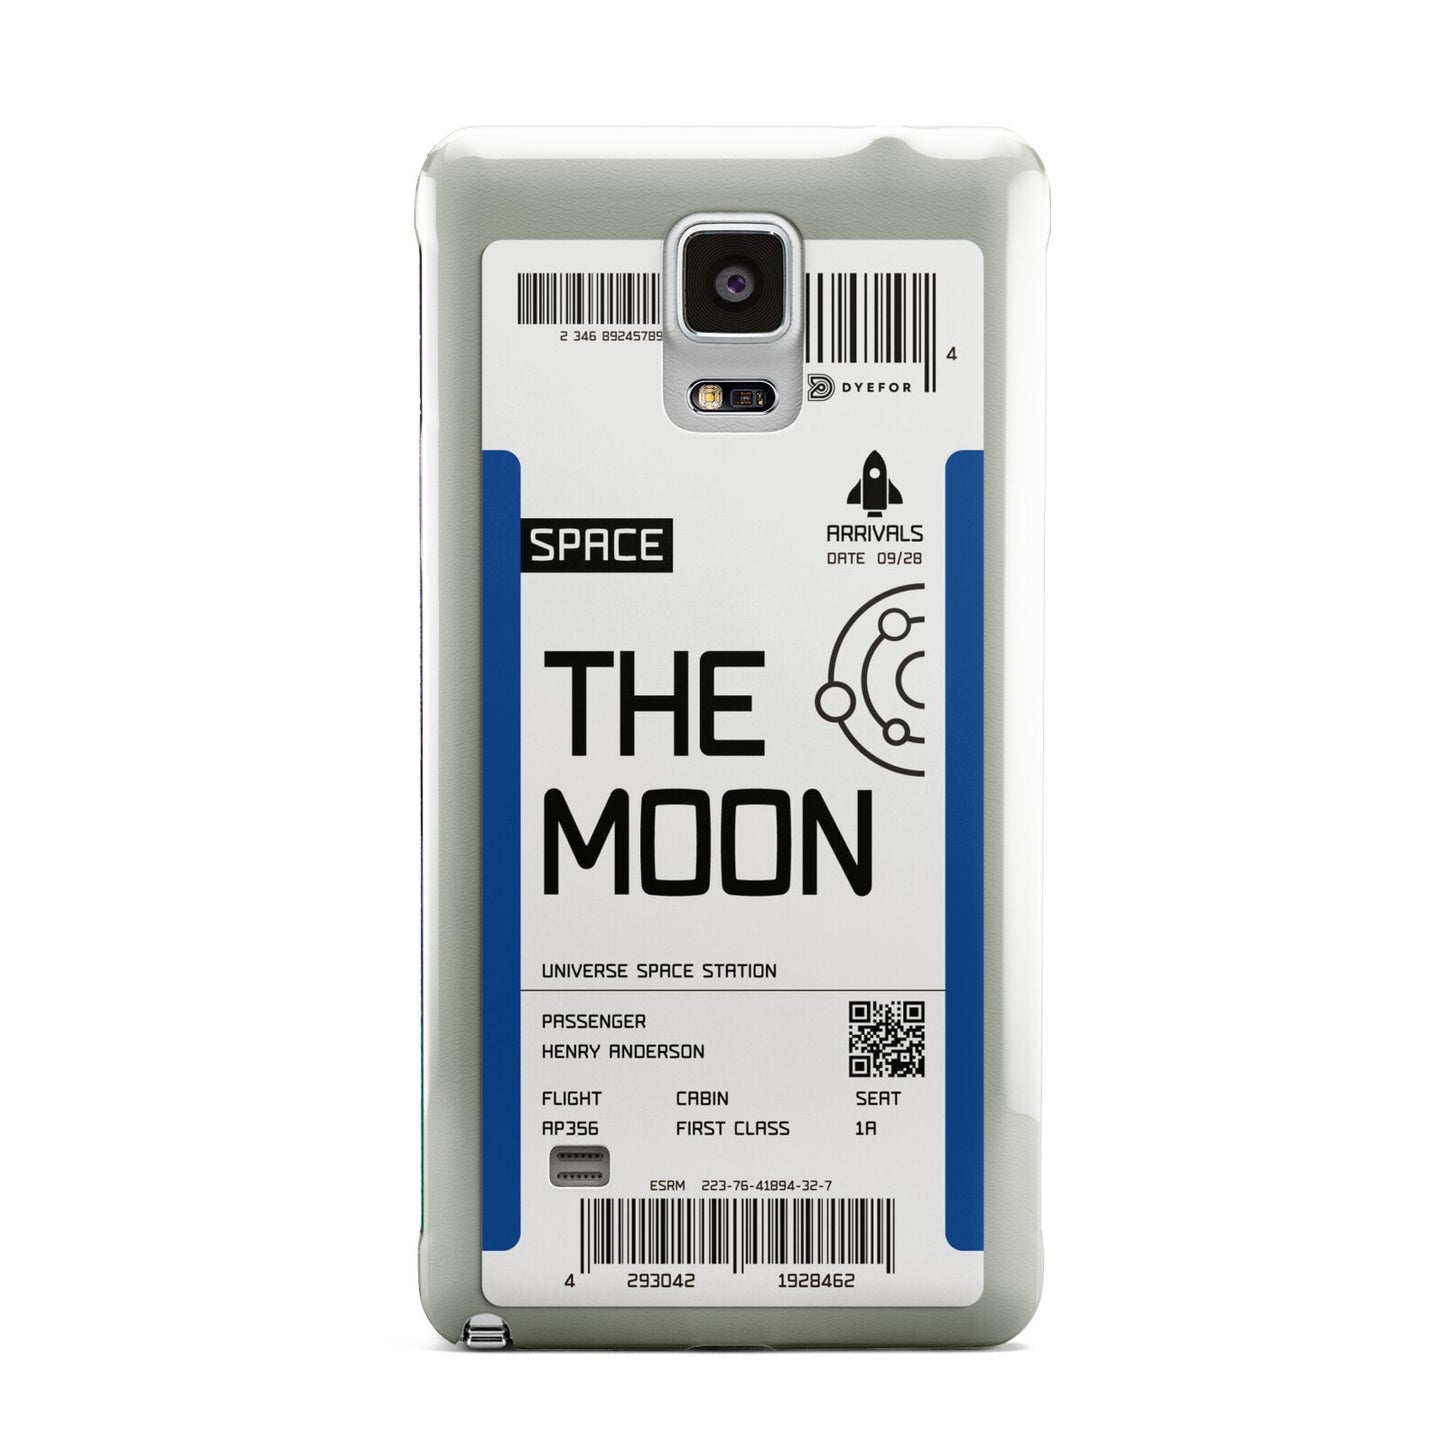 The Moon Boarding Pass Samsung Galaxy Note 4 Case